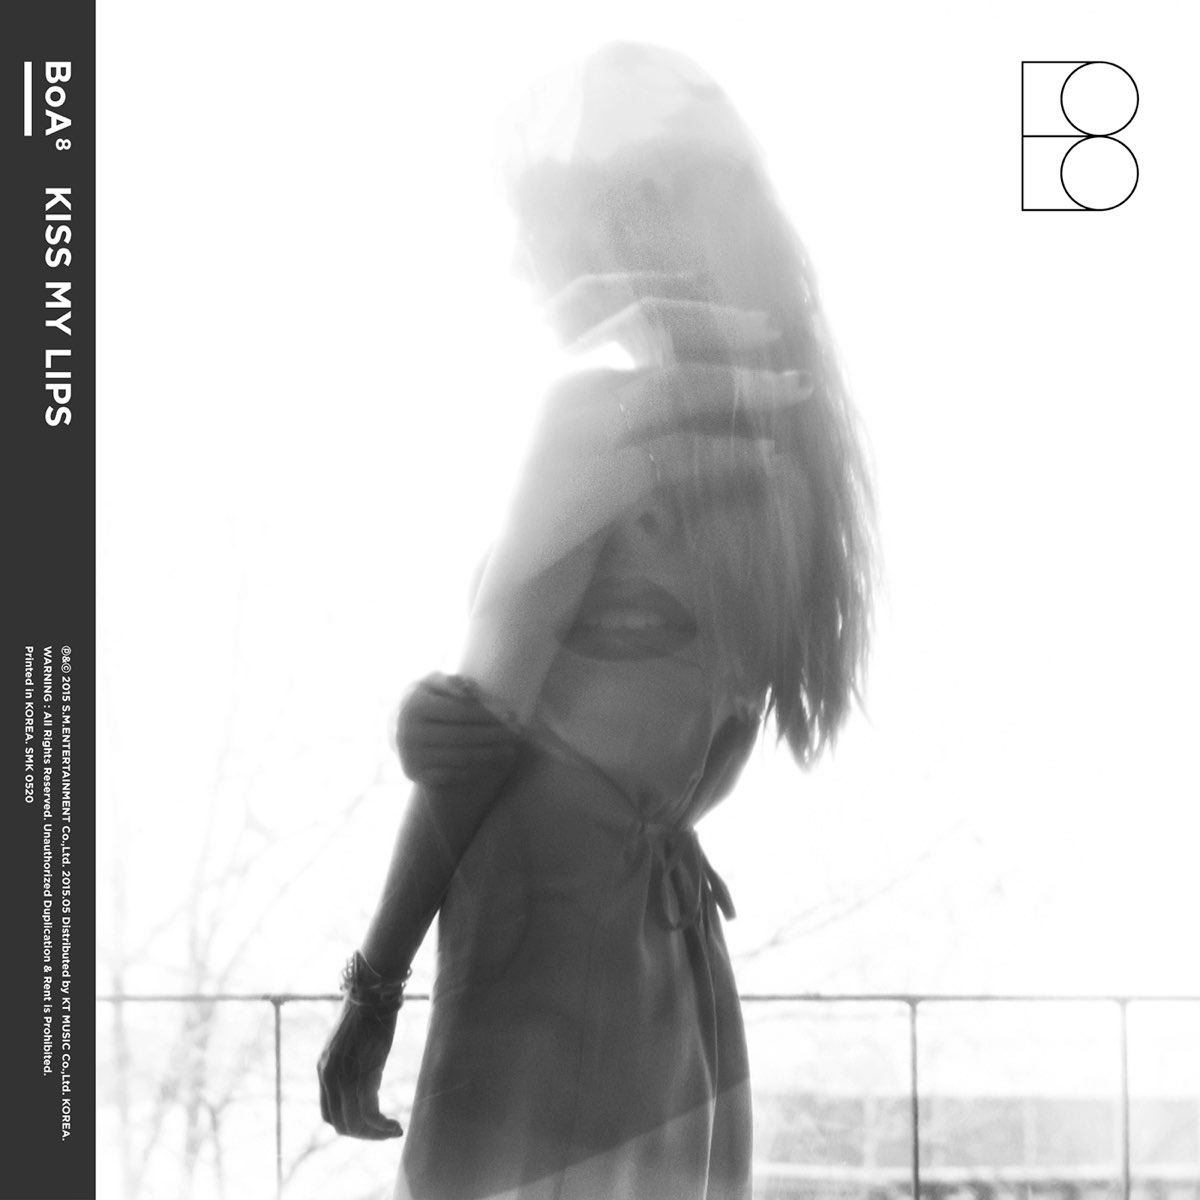 Kiss My Lips - The 8th Album by BoA on Apple Music